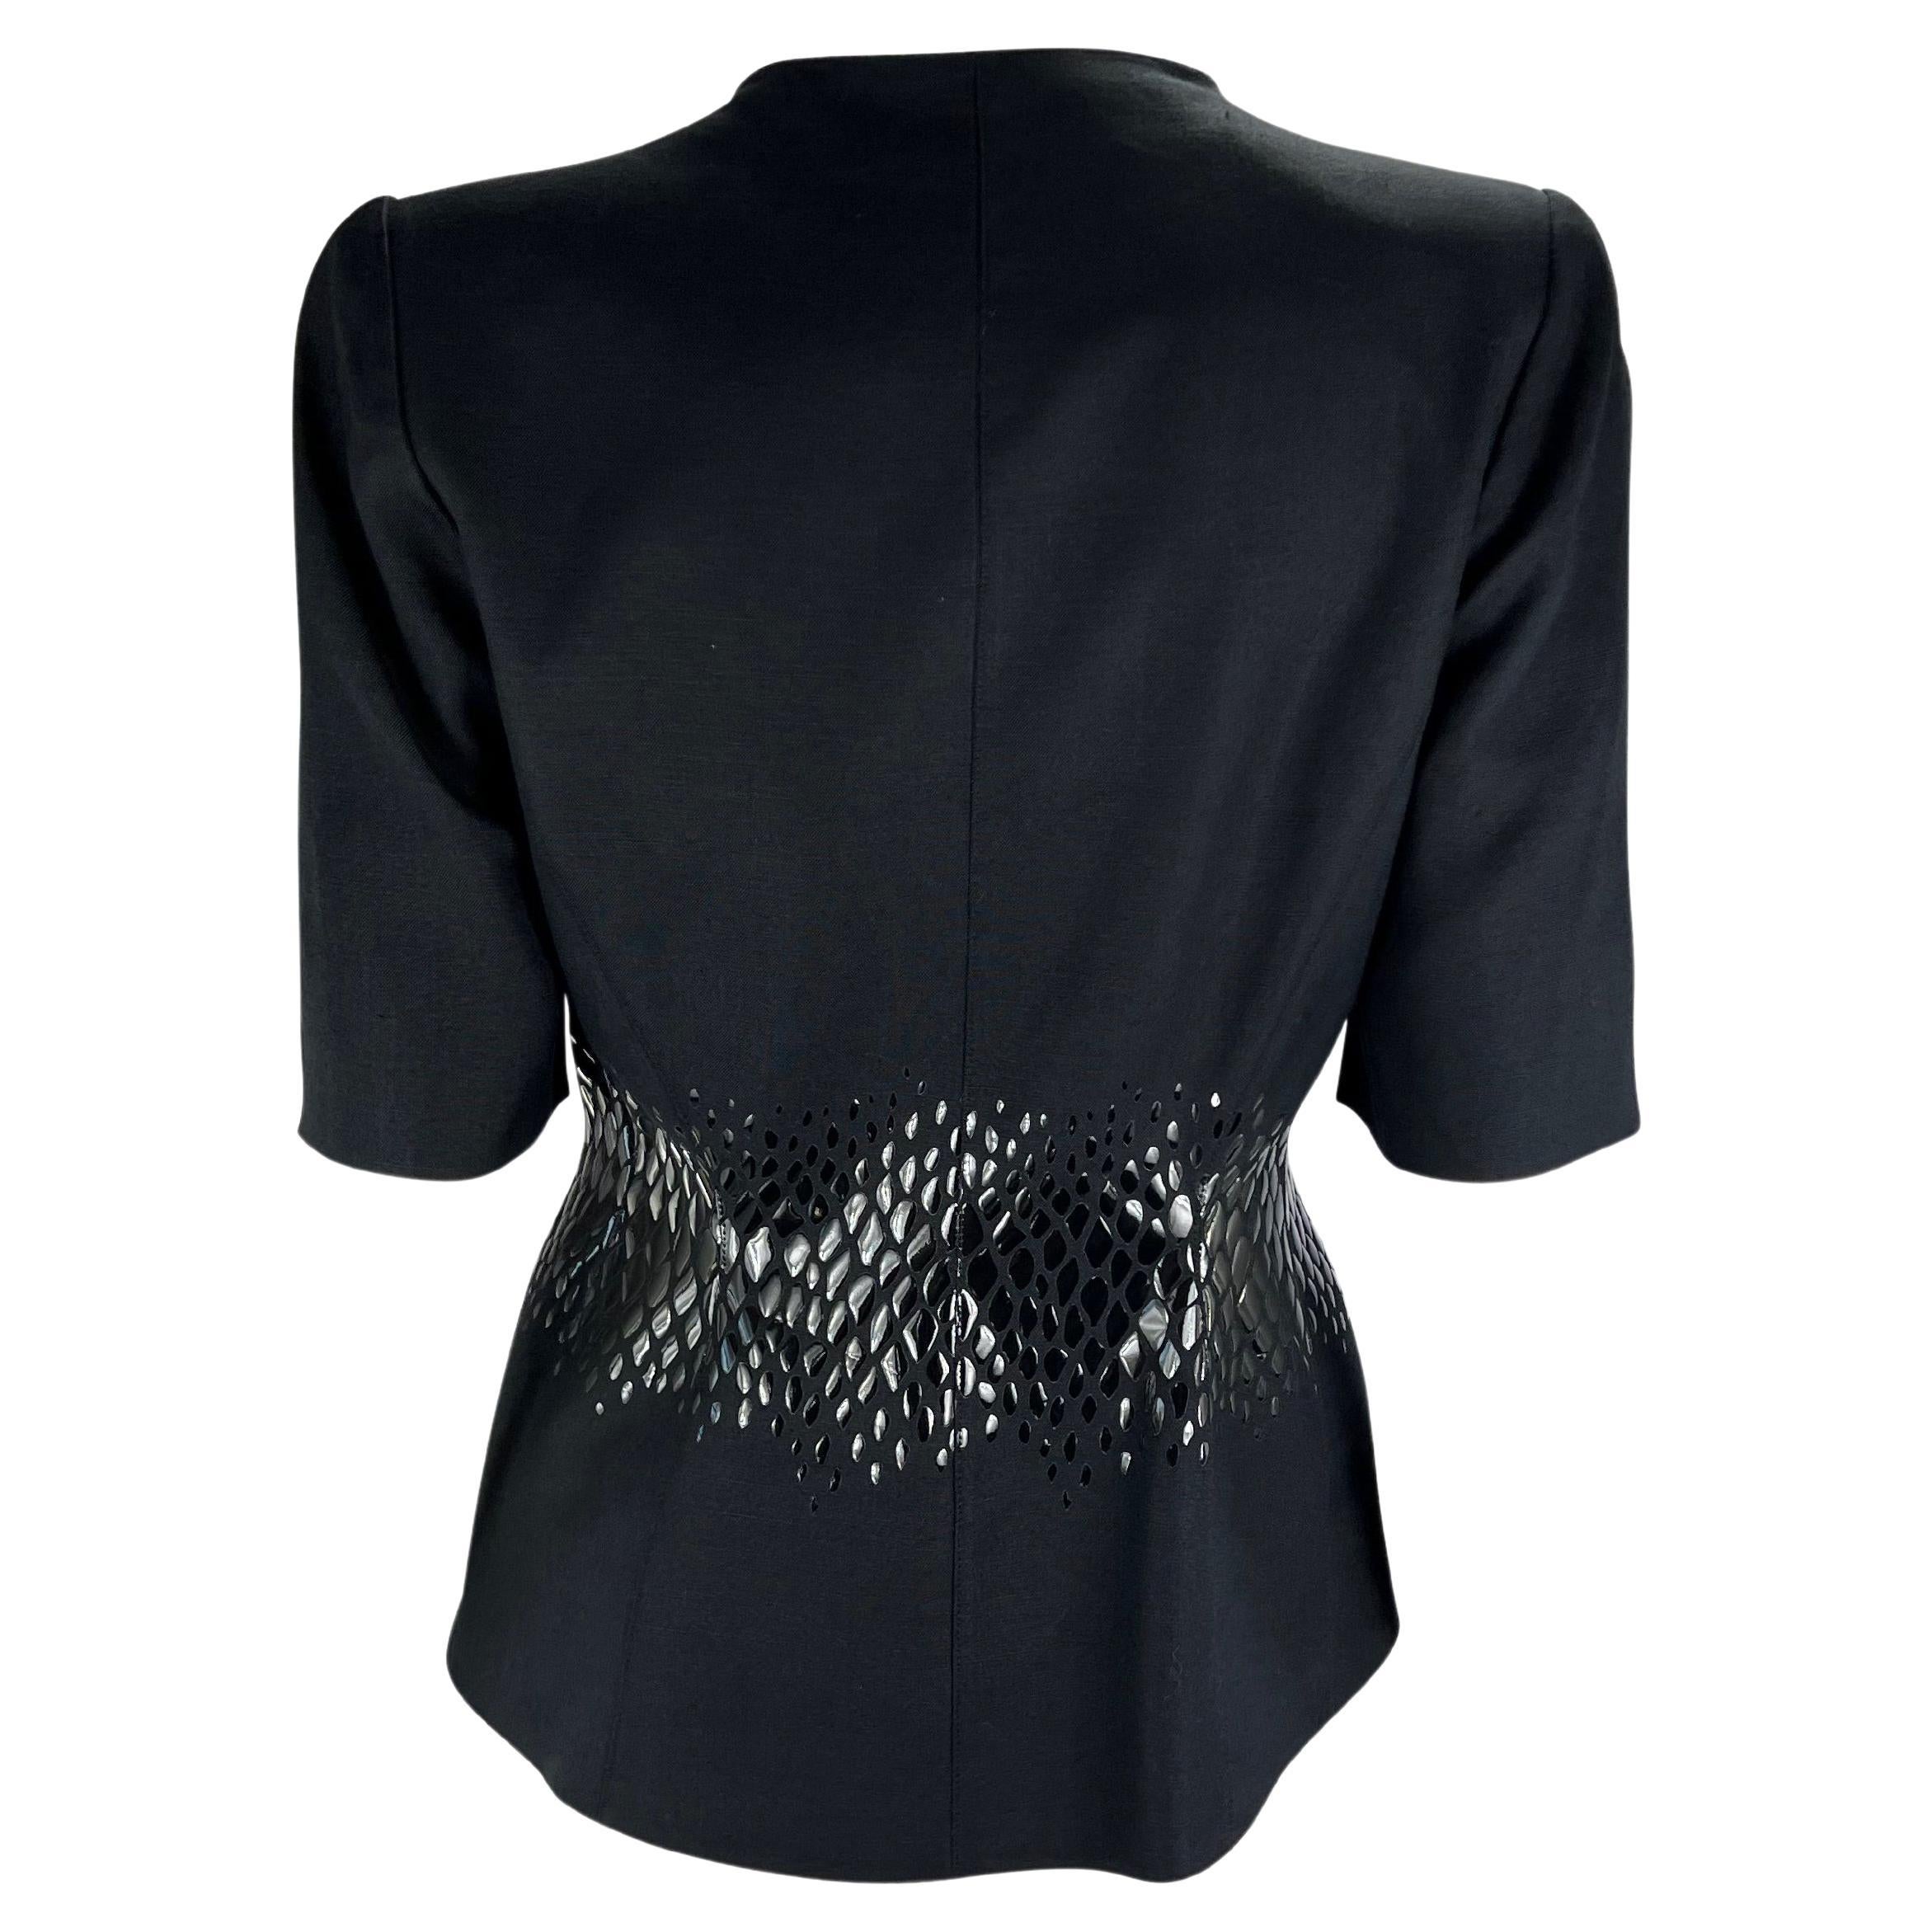 Cruise 2000 Thierry Mugler Black Reptile Scale Appliqué Short Sleeve Blazer Y2K In Excellent Condition For Sale In West Hollywood, CA